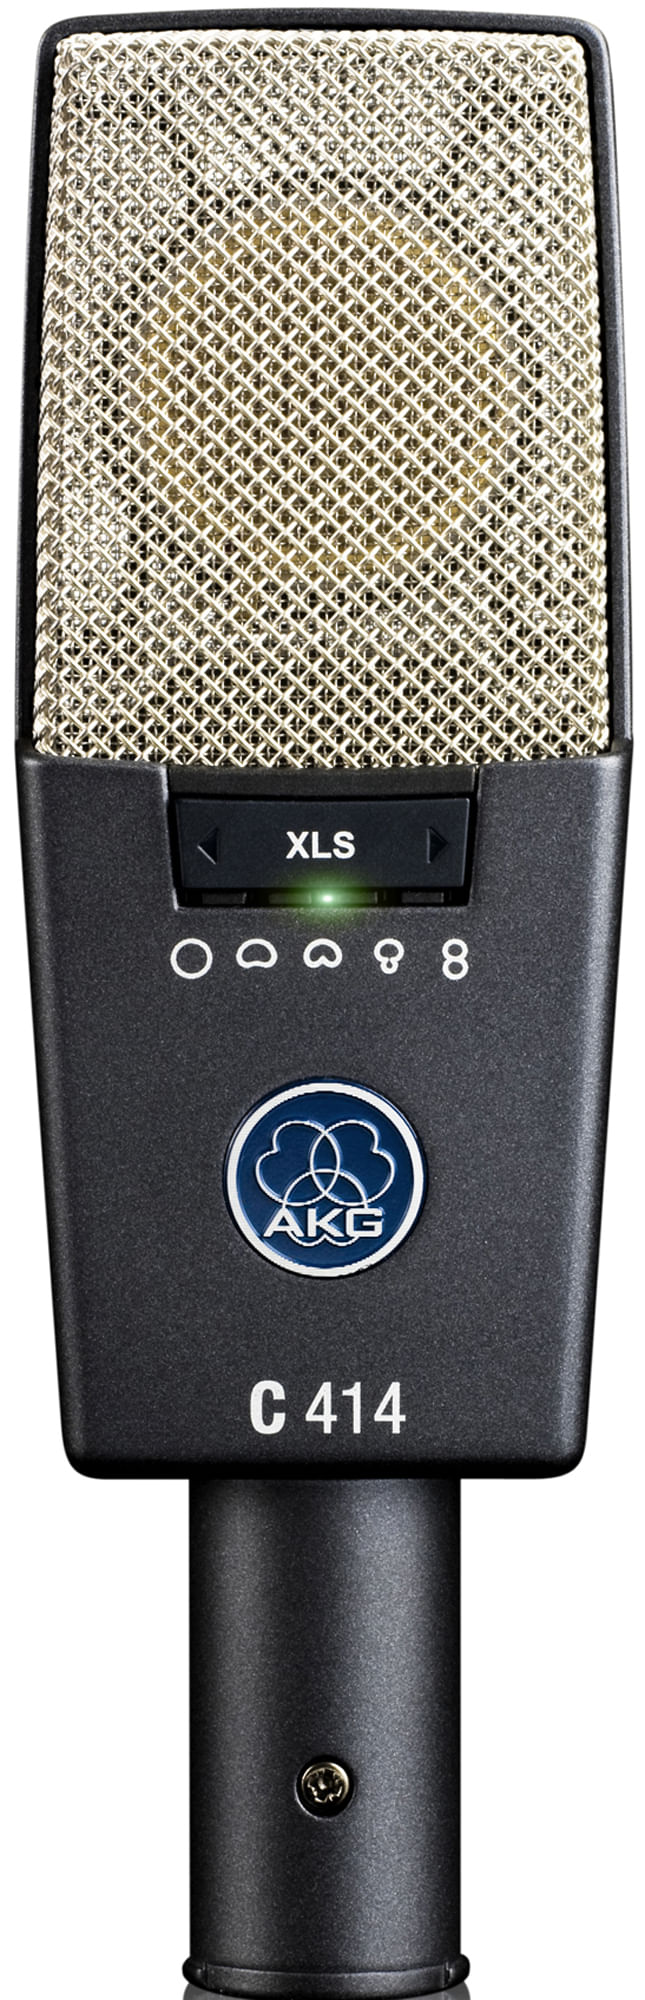 AKG C414 XLS Reference Condenser Microphone